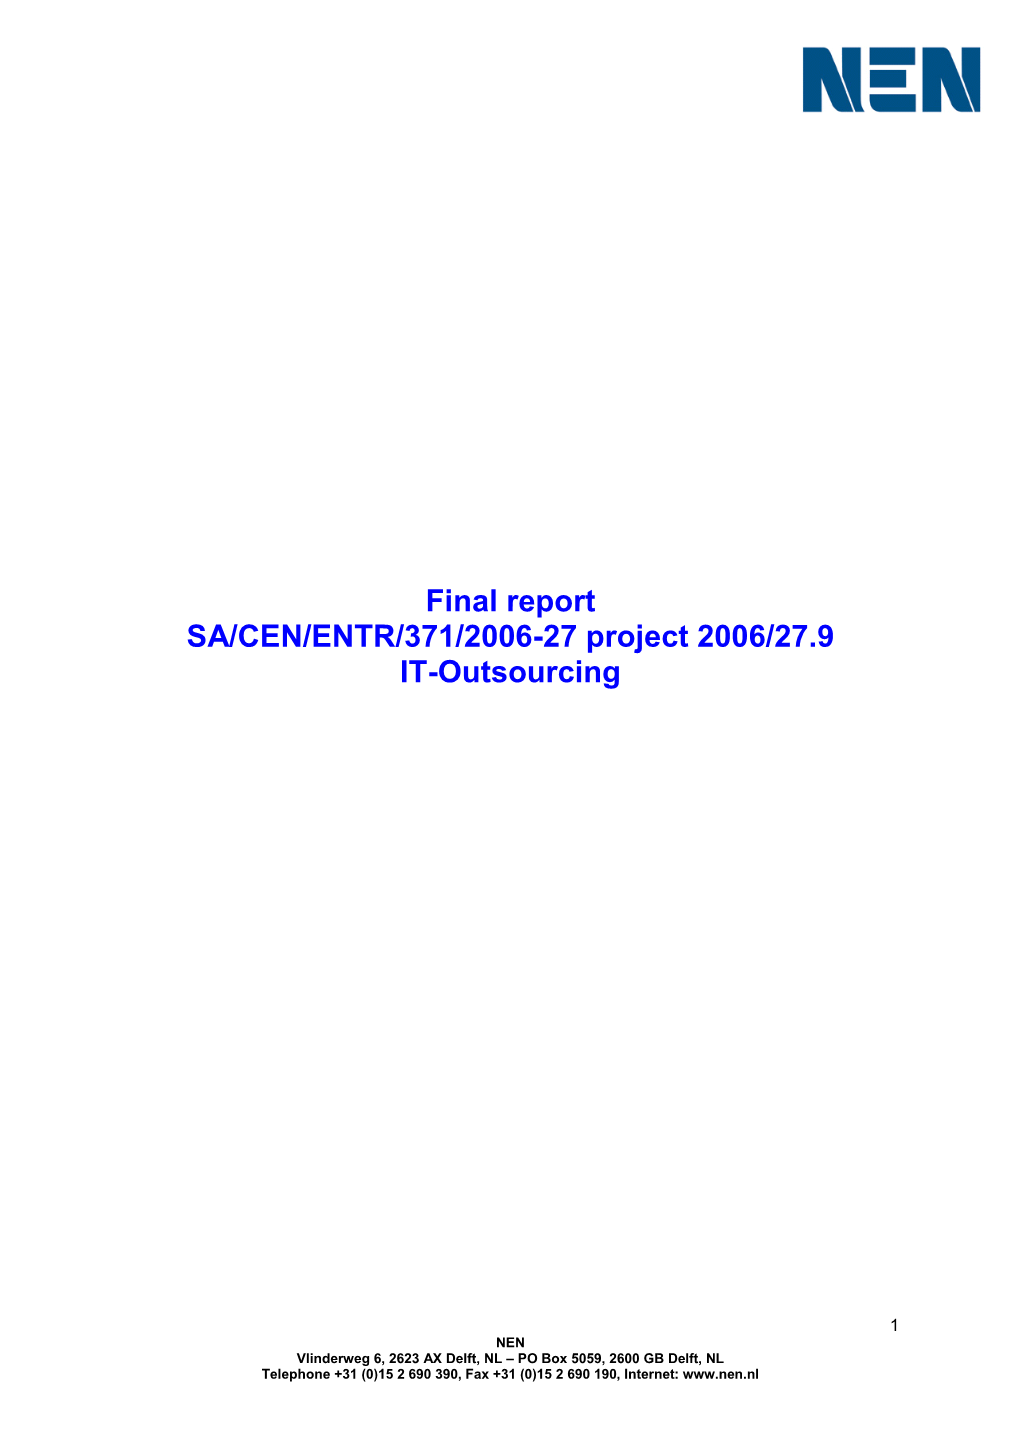 Final Report SA/CEN/ENTR/371/2006-27 Project 2006/27.9 IT-Outsourcing